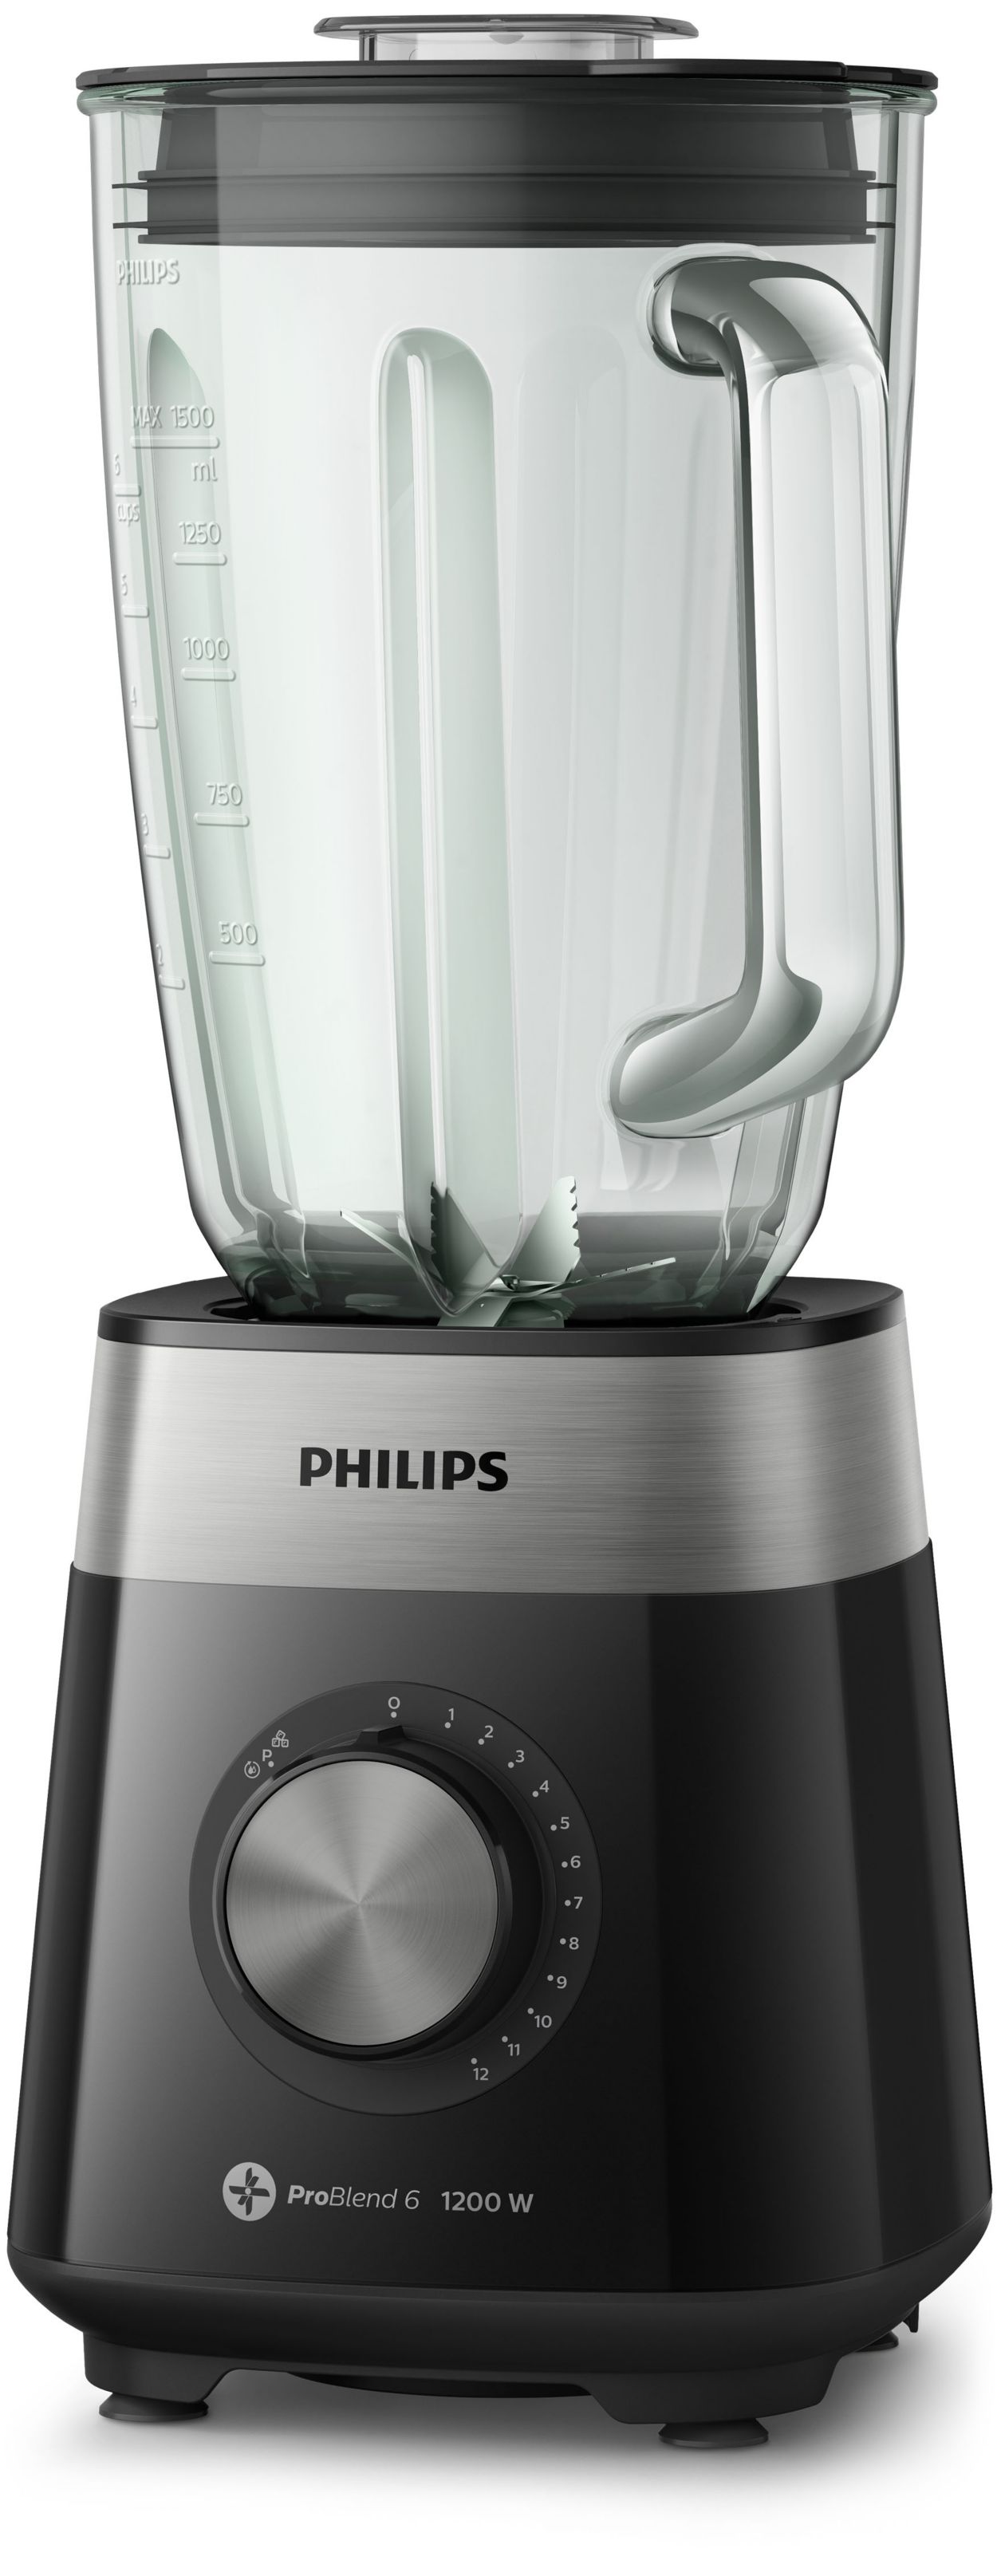 https://images.philips.com/is/image/philipsconsumer/632be95474d446559a96ad3601715c78?$jpglarge$&wid=1250